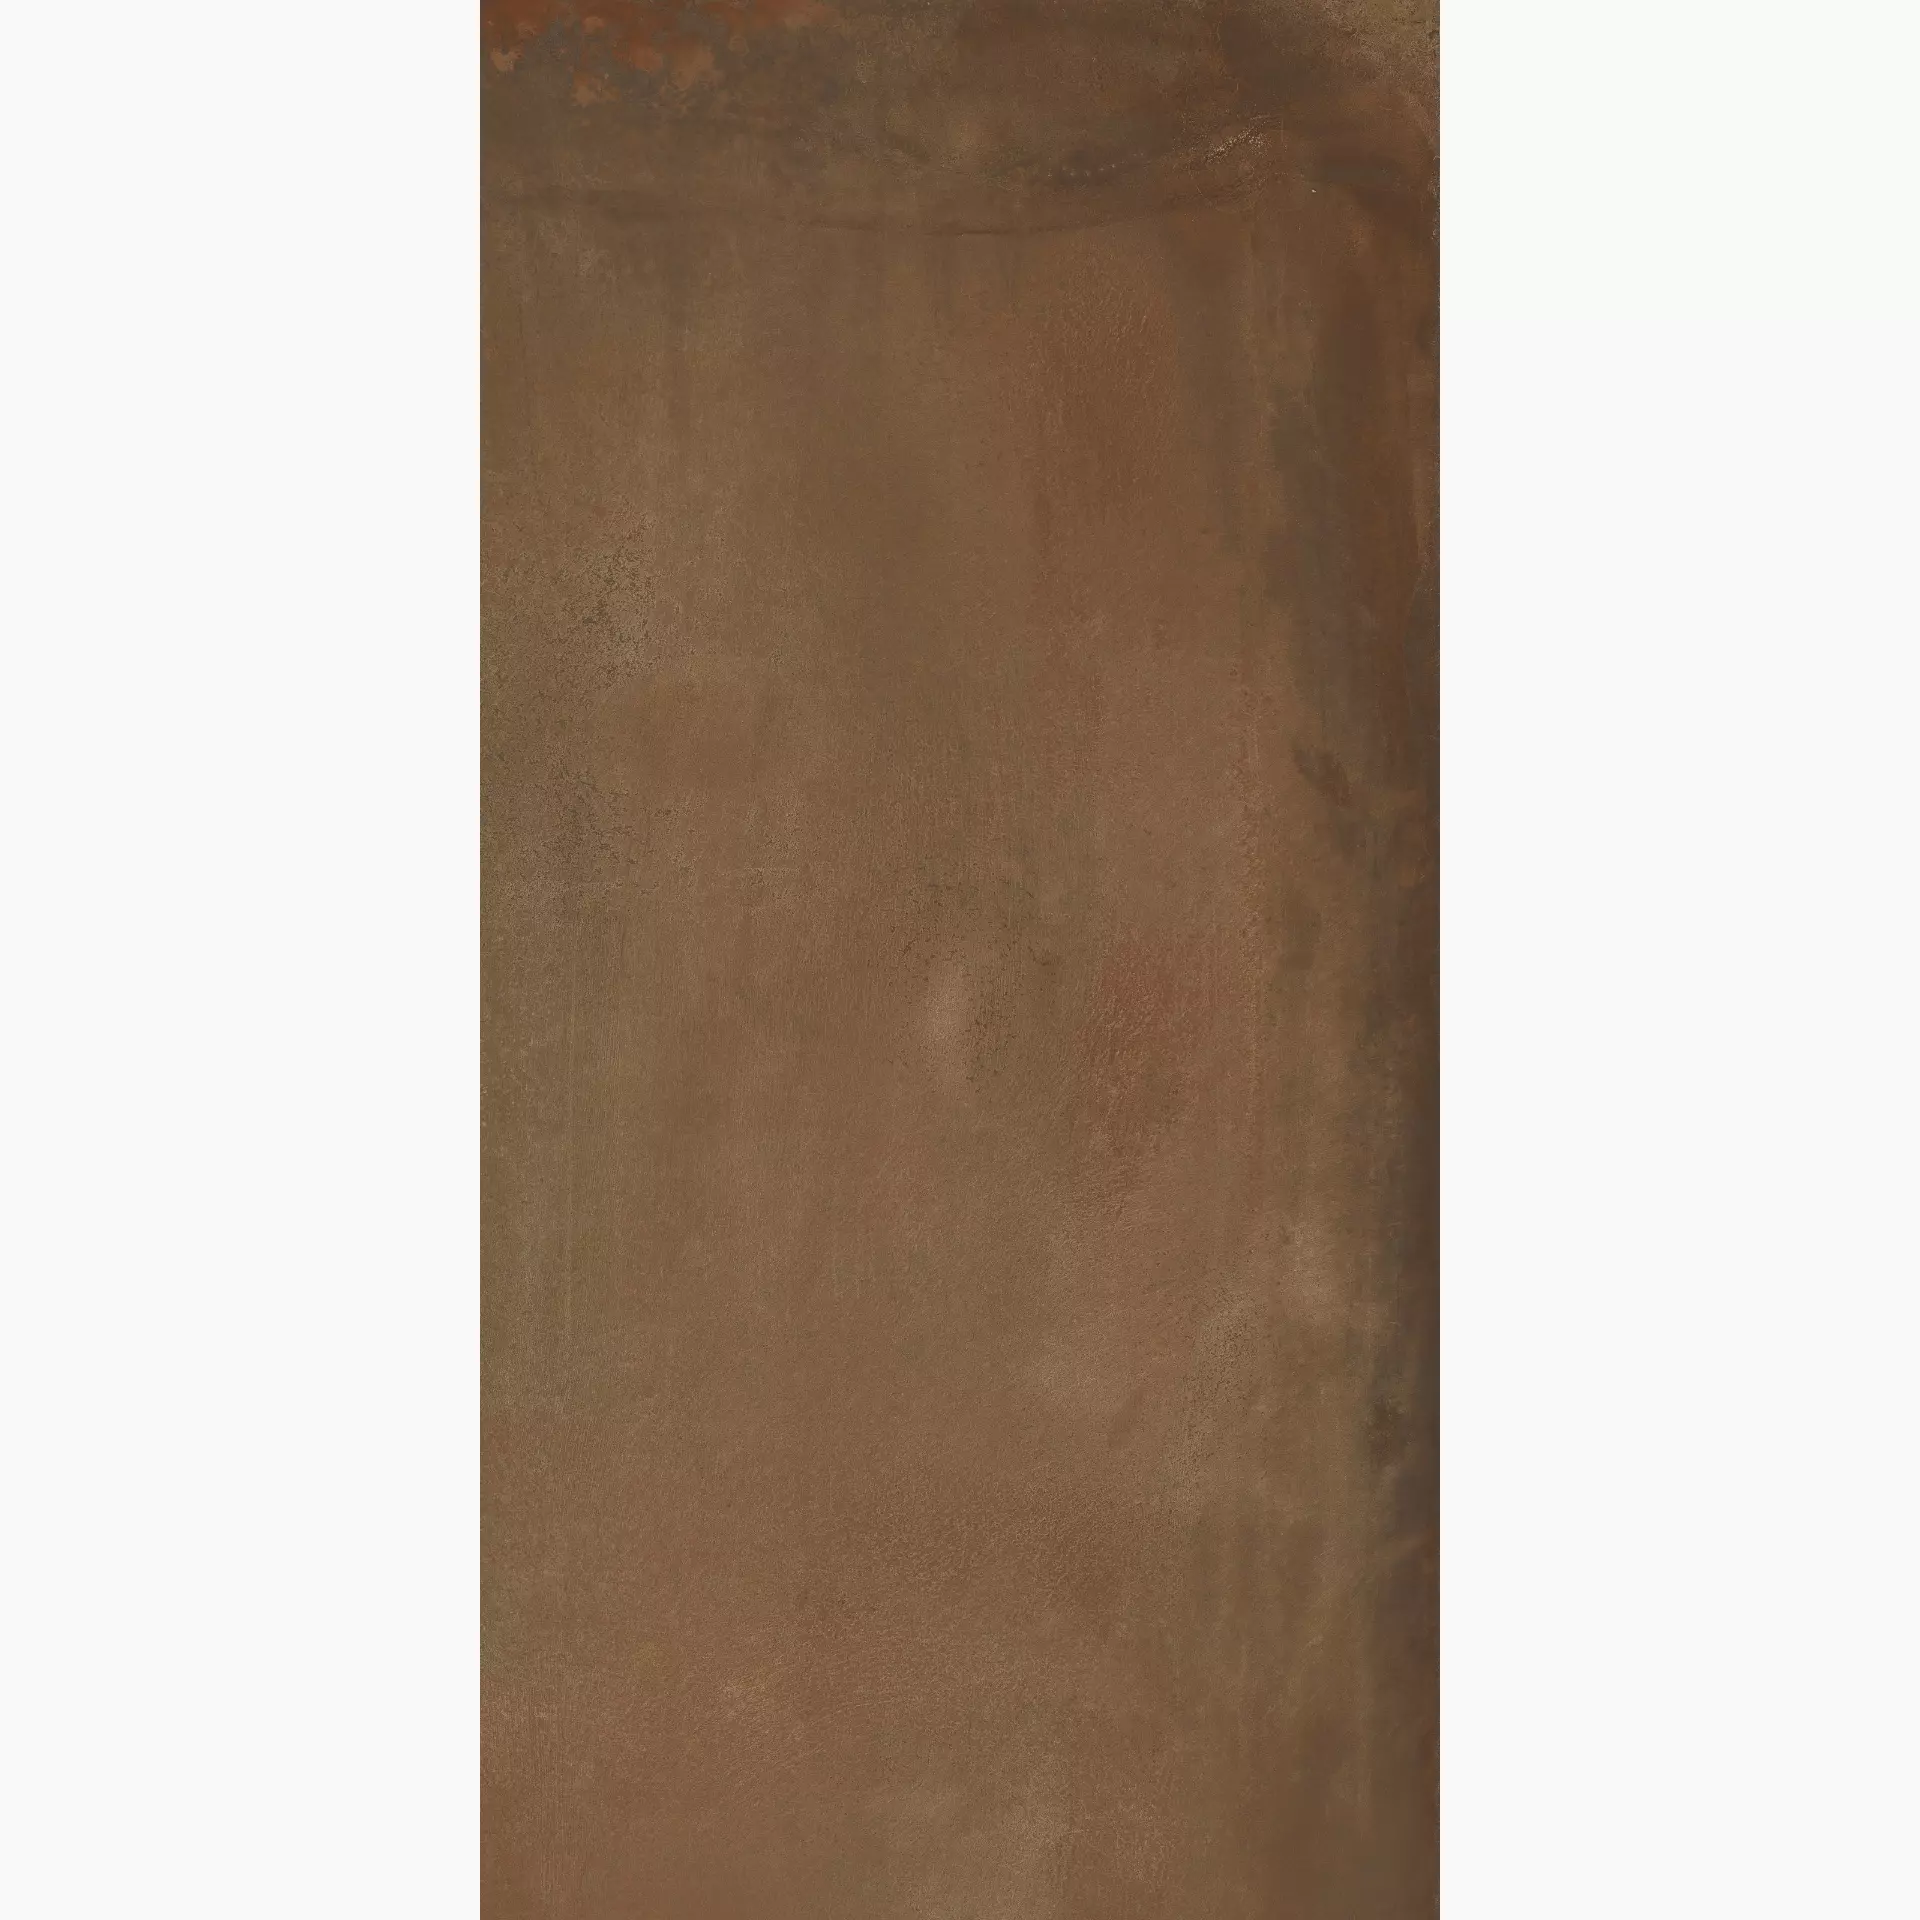 ABK Interno9 Wide Rust Naturale PF60000305 80x160cm rectified 8,5mm